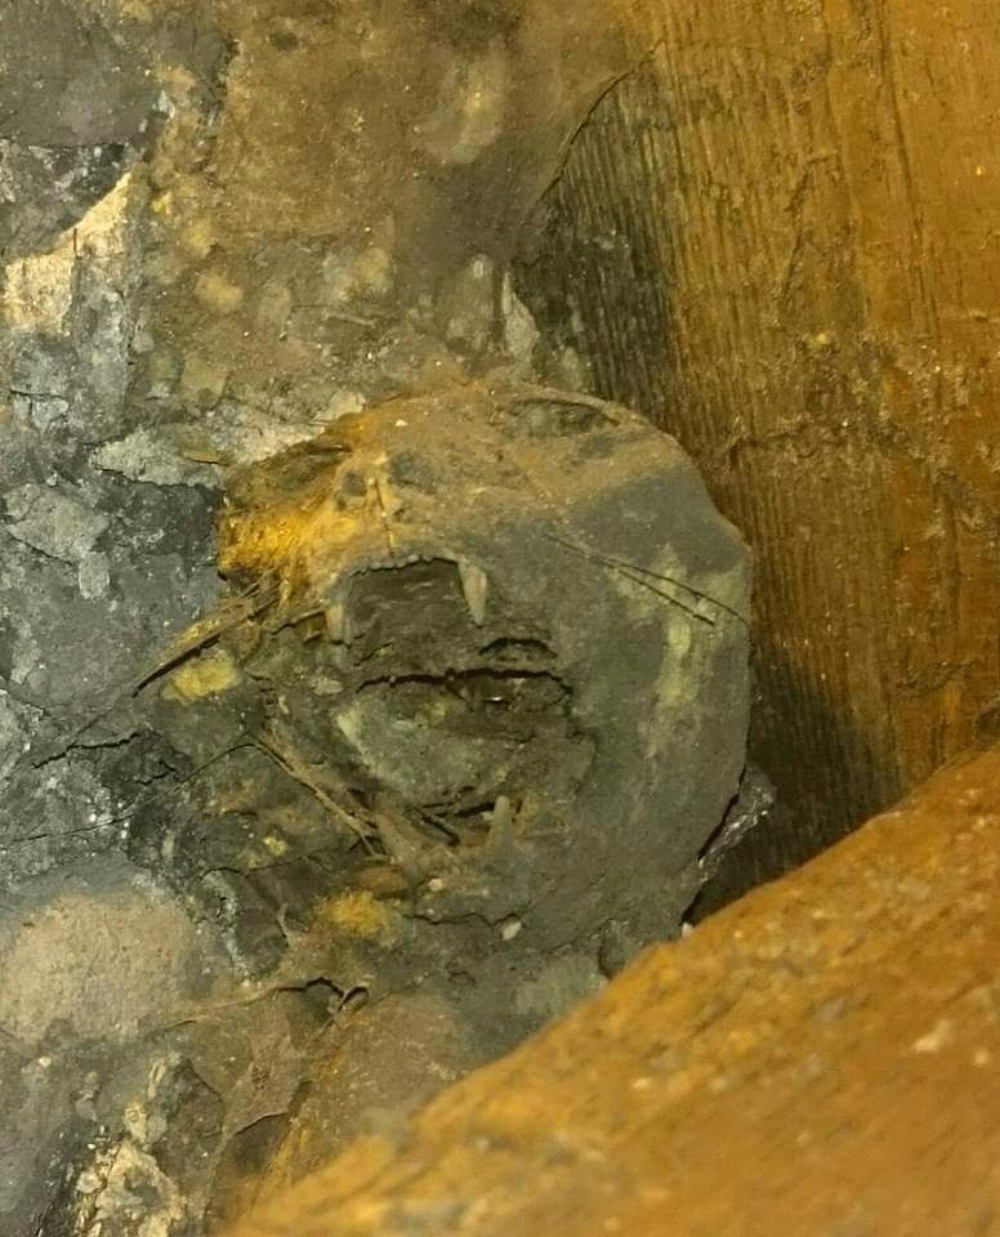 mummified cat found in the floorboards of a Victorian house